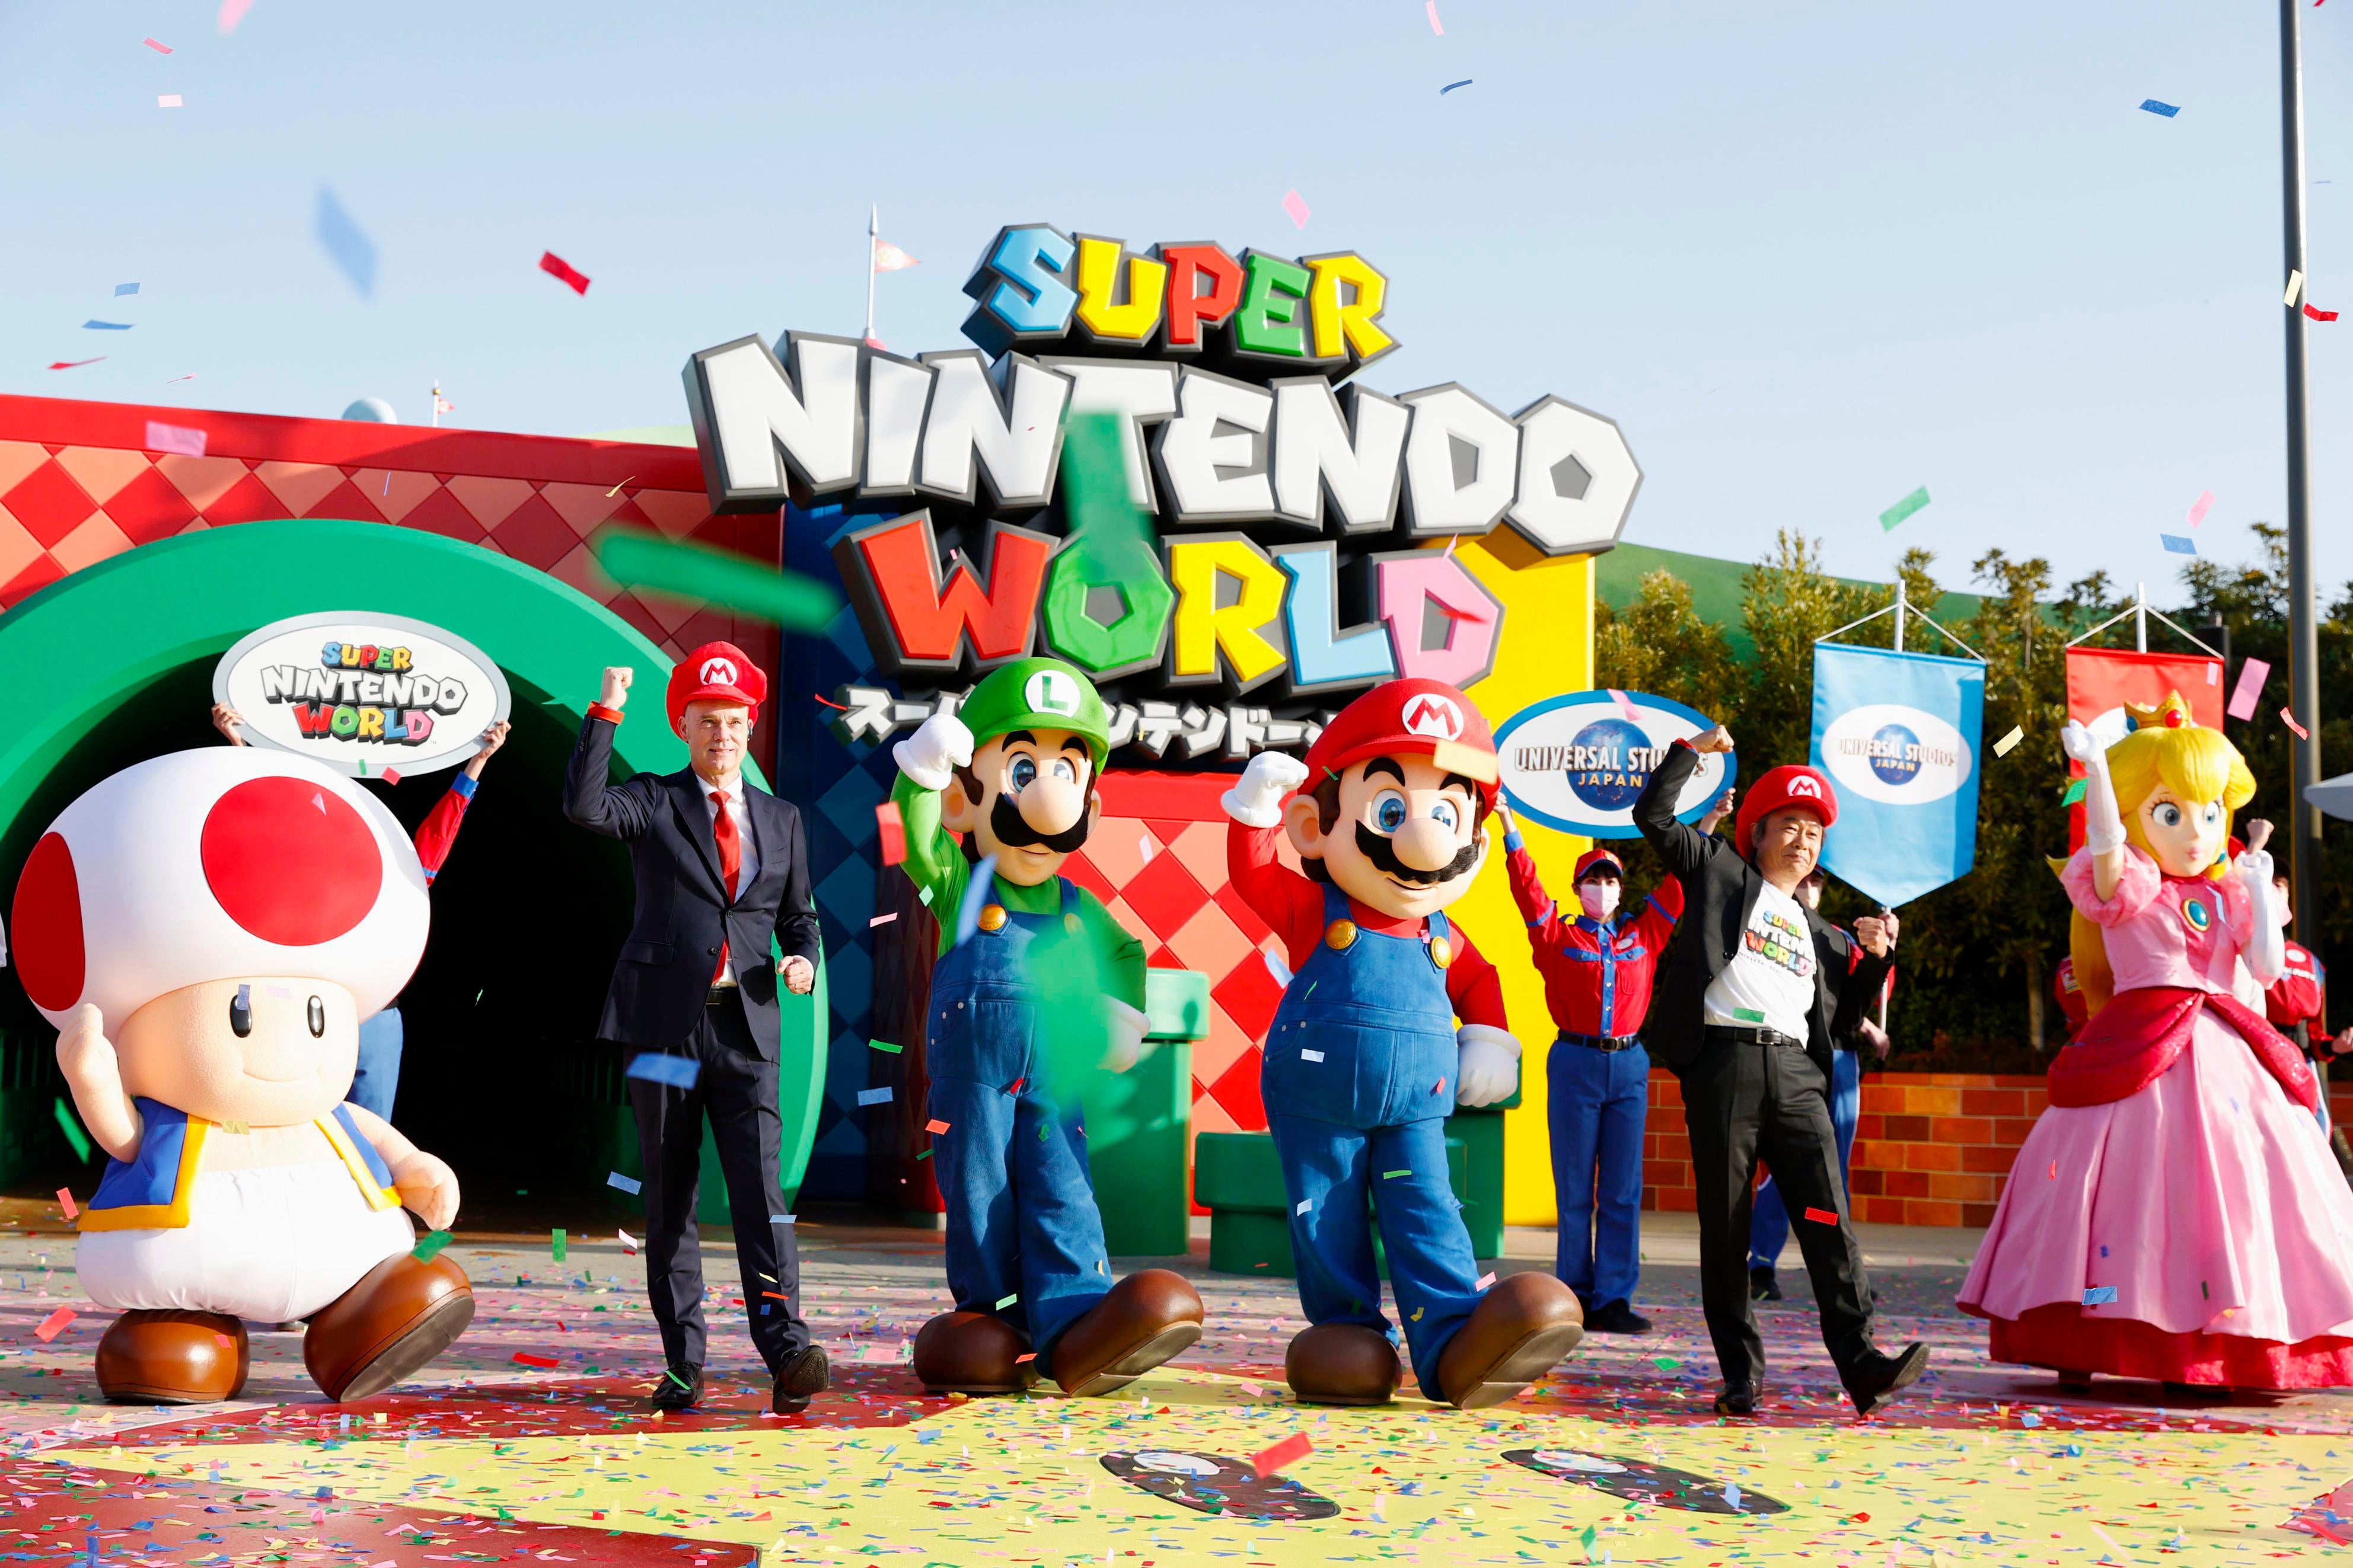 Mario, centre, and other characters participate in the opening ceremony of “Super Nintendo World,” the new attraction based on Nintendo Co.’s “Super Mario Bros”